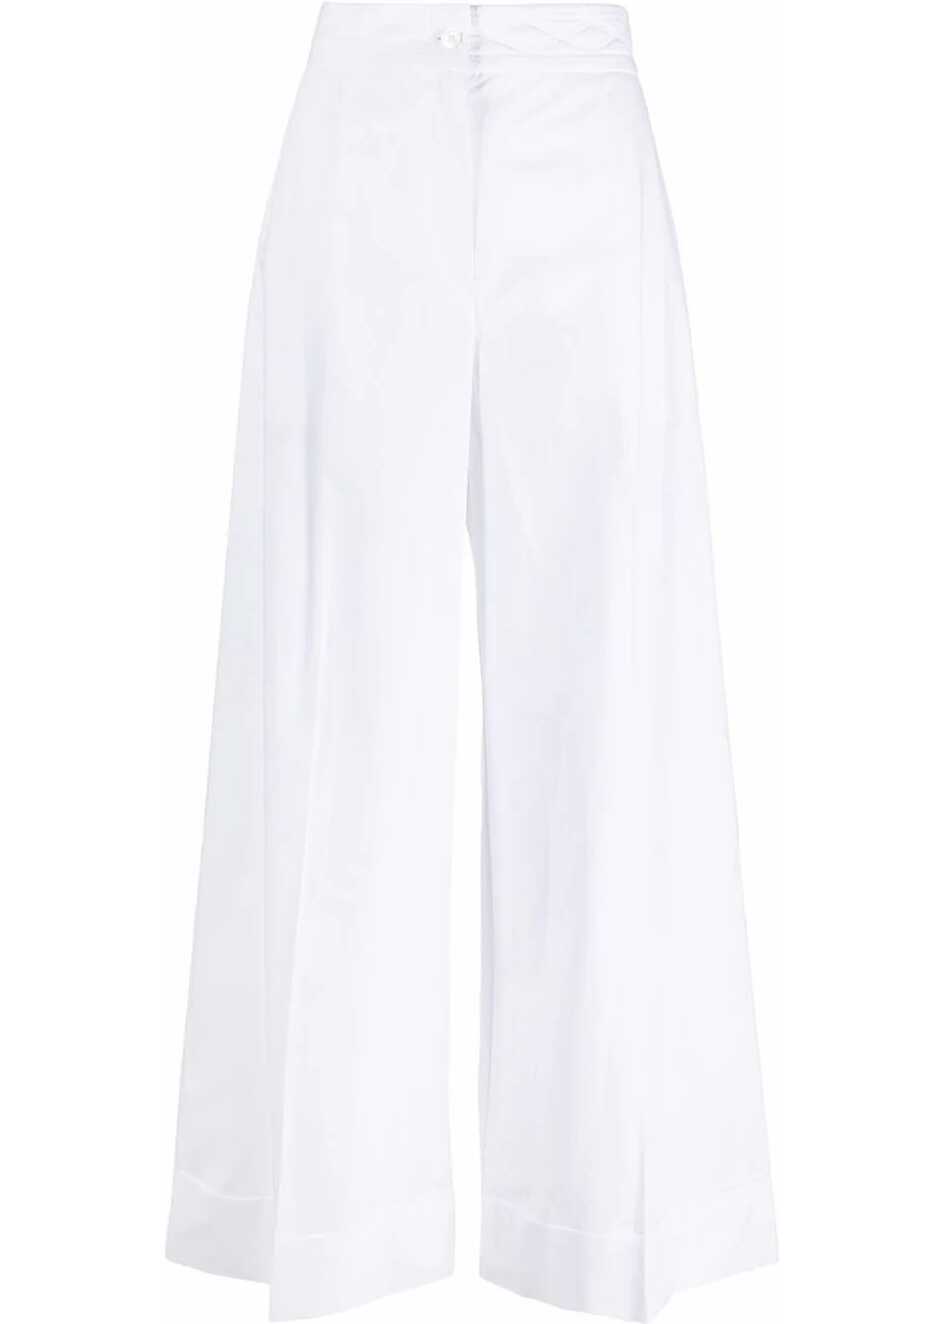 Chloe See By Single-Pleated Cotton Palazzo Pants White